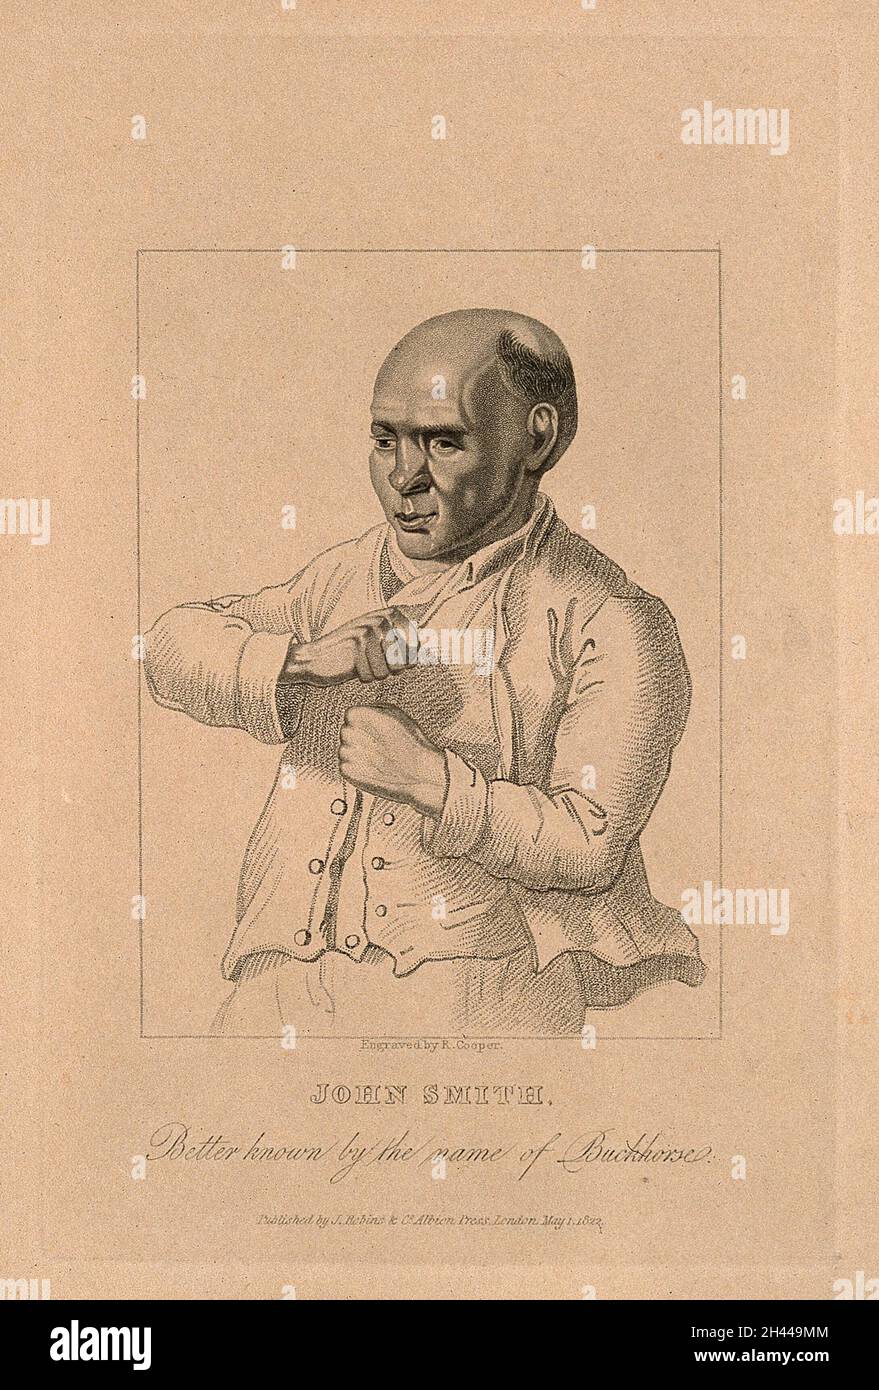 John Smith, known as Buckhorse, a pugilist. Stipple engraving by R. Cooper, 1822, after D. Dodd. Stock Photo